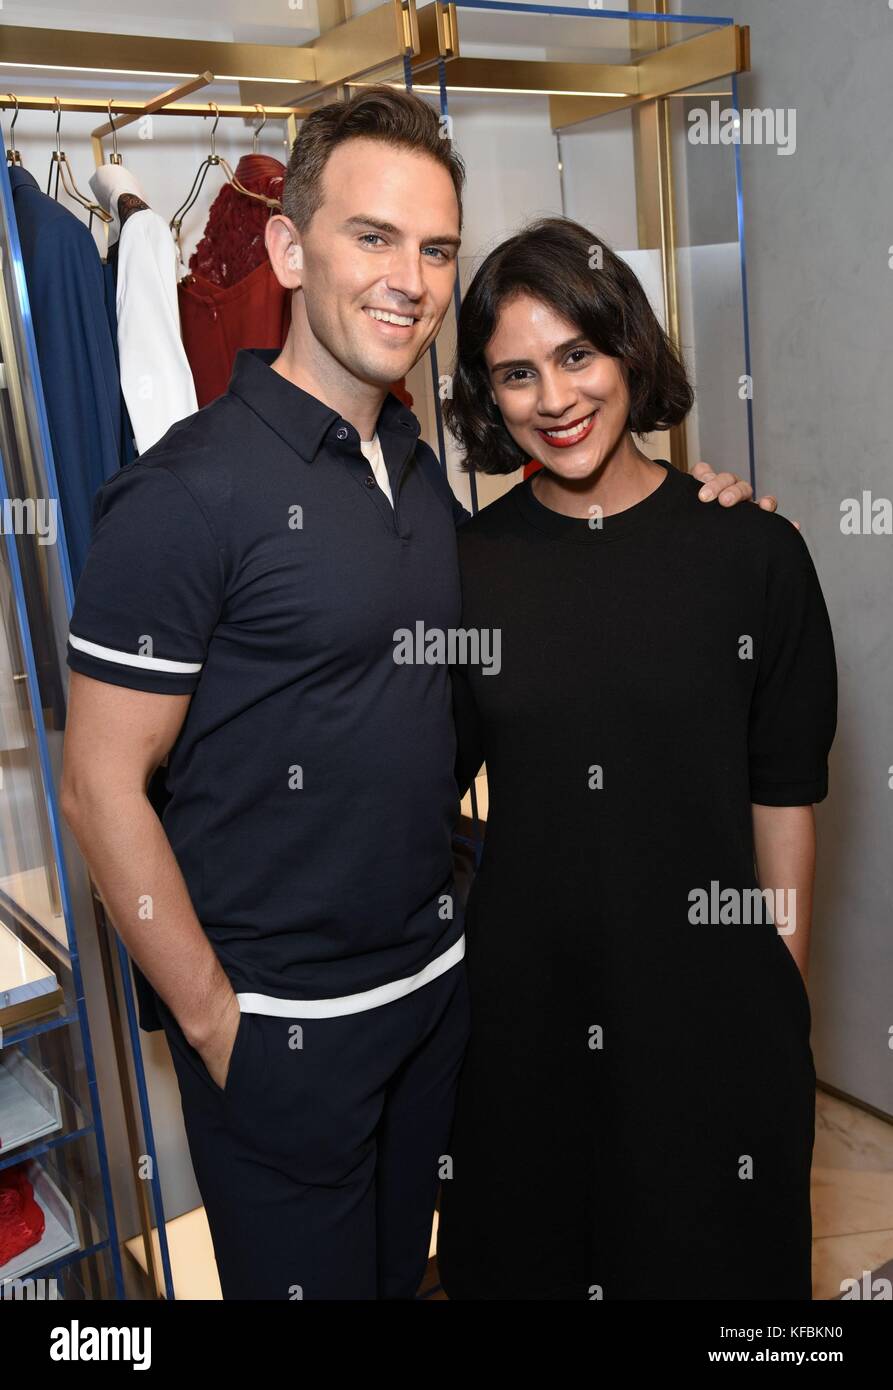 New York, NY, USA. 26th Oct, 2017. Daniel Reichard, Denise Martinez at  arrivals for LA PERLA Partners with Broadway Cares/Equity Fights AIDS, La  Perla, New York, NY October 26, 2017. Credit: Derek